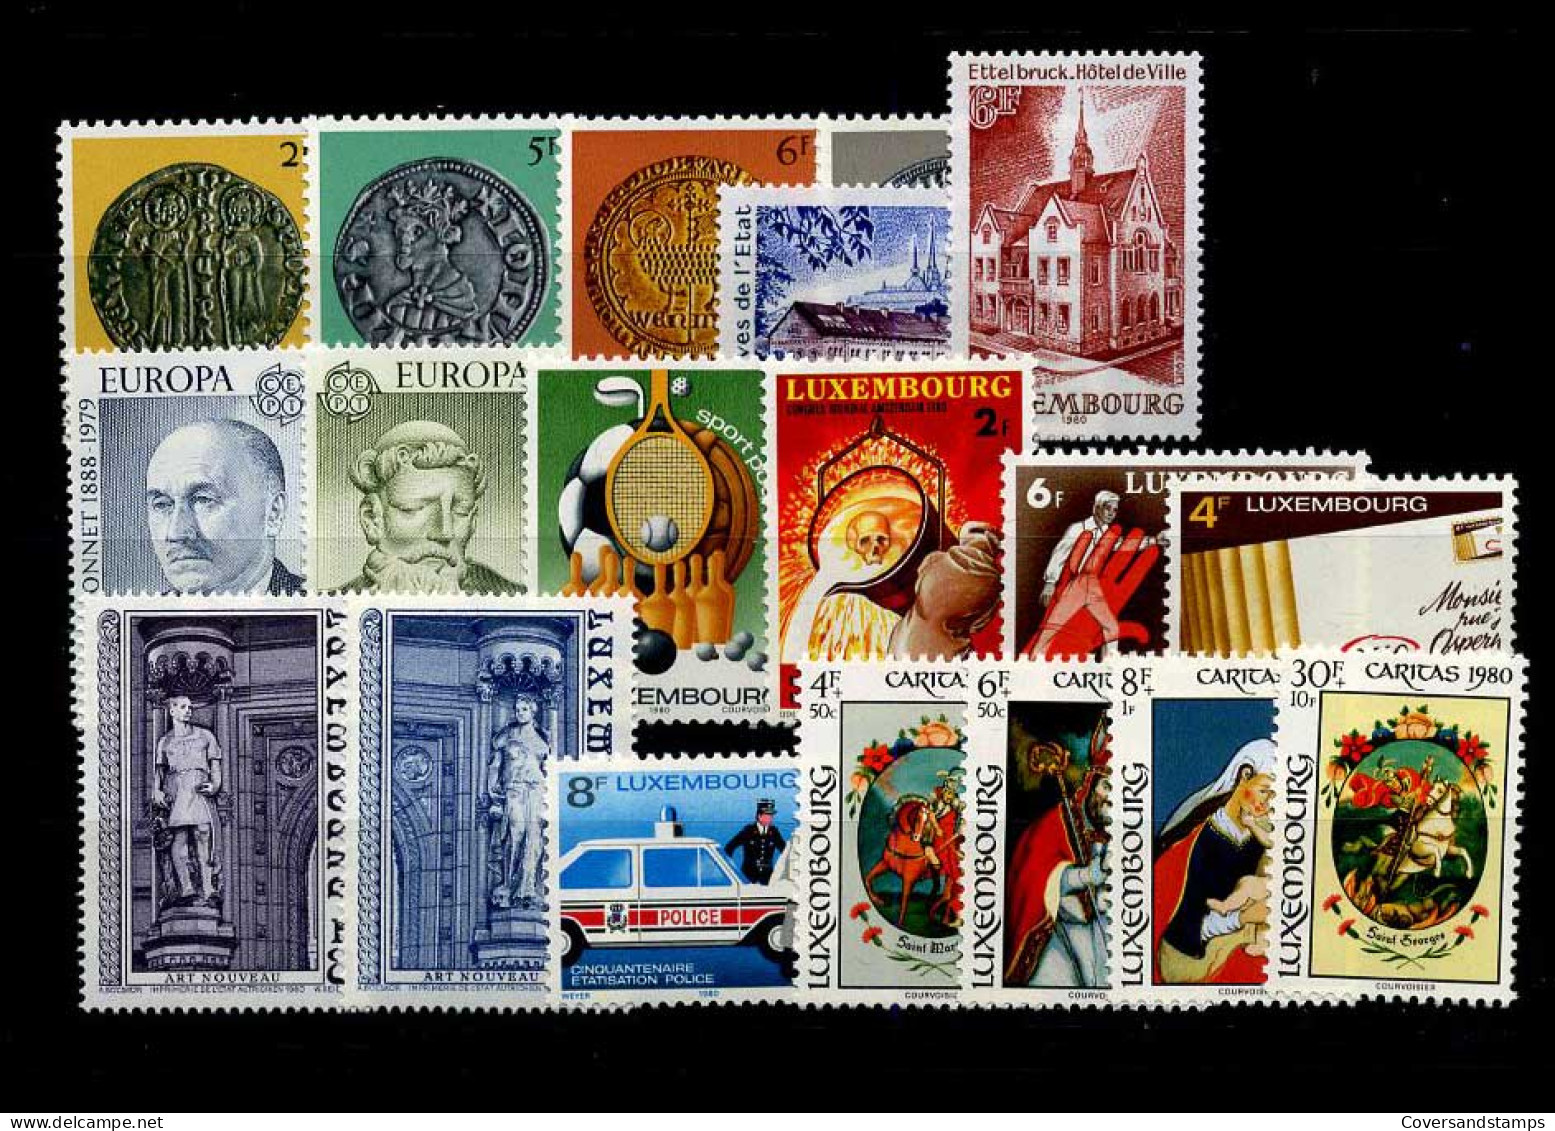 Luxembourg - Yearset 1980 - MNH - Annate Complete